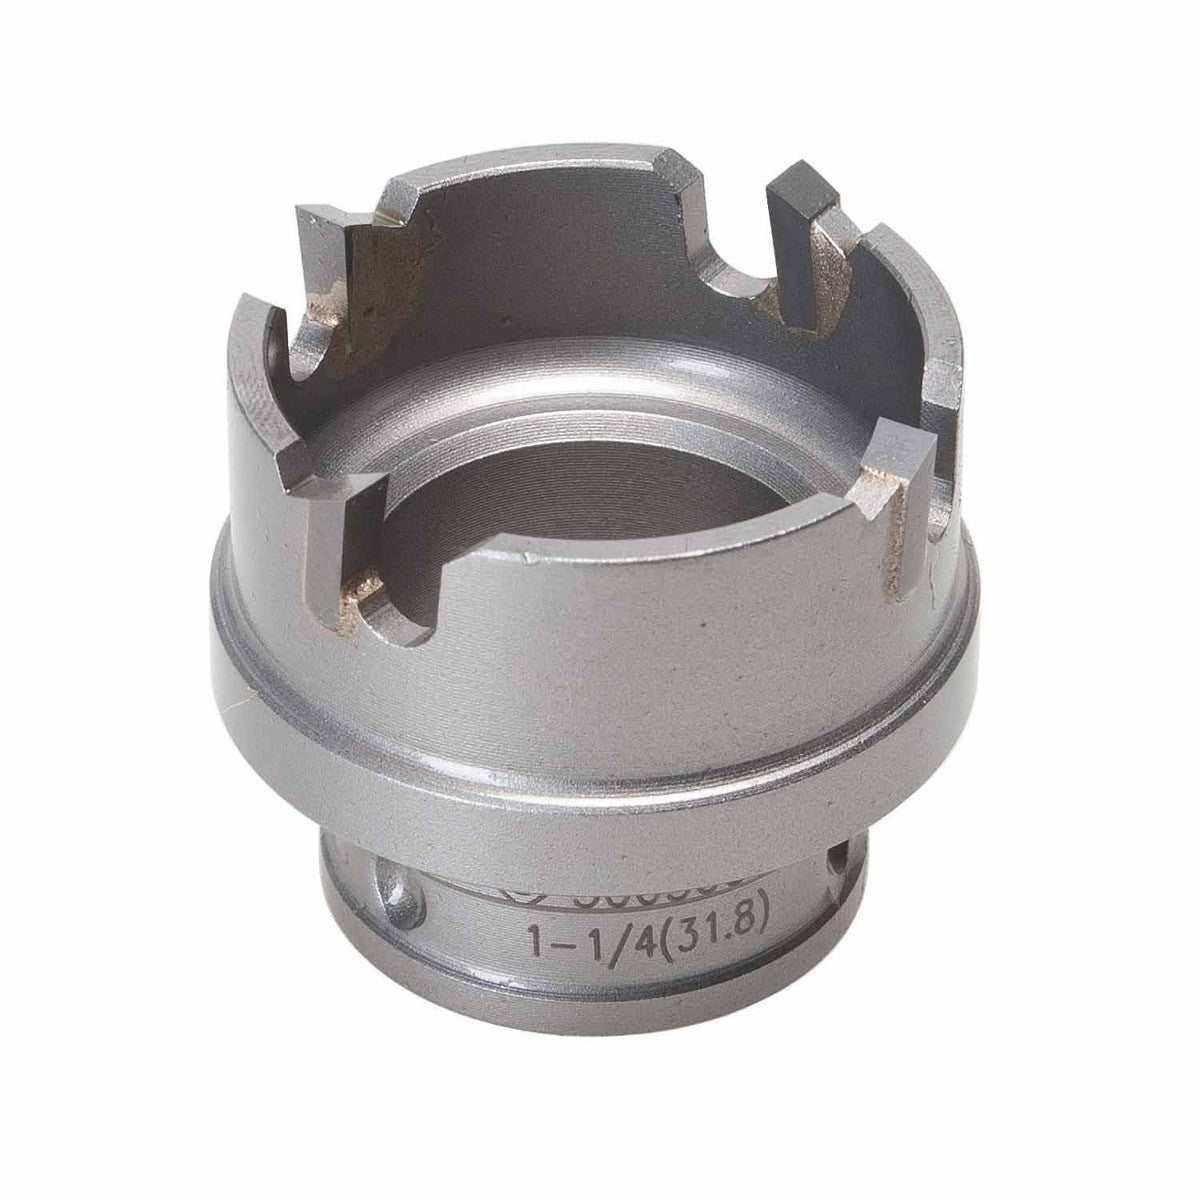 Greenlee 645-1-1/4 1-1/4" Quick Change Stainless Steel Carbide-Tipped Hole Cutter